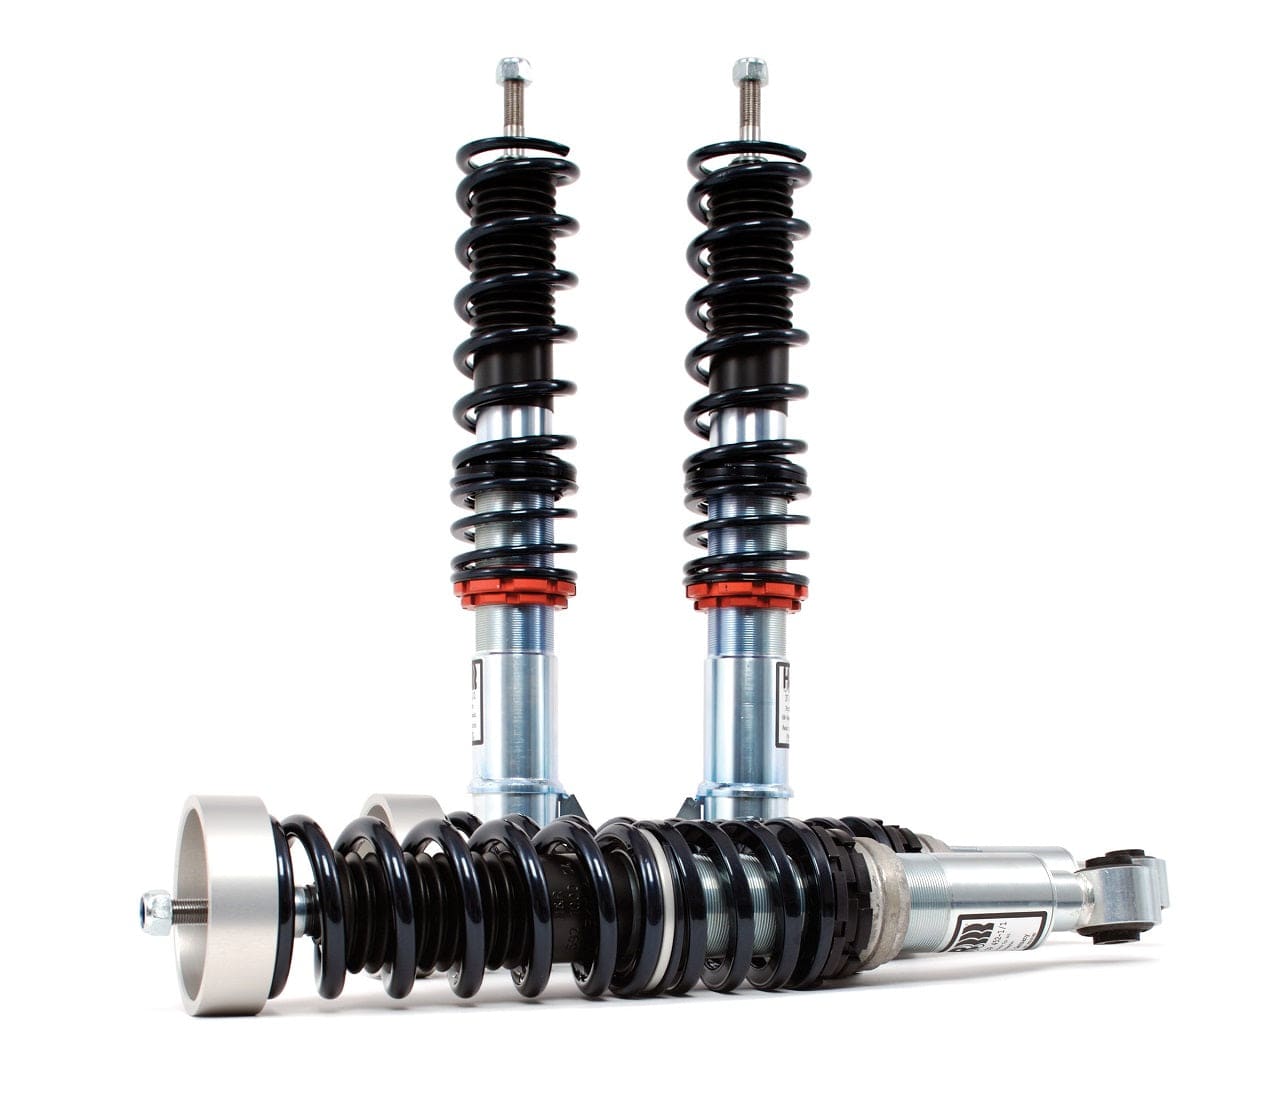 H&R RSS Coilovers for 2010 Ford Mustang Convertible V6/V8 RSS29170